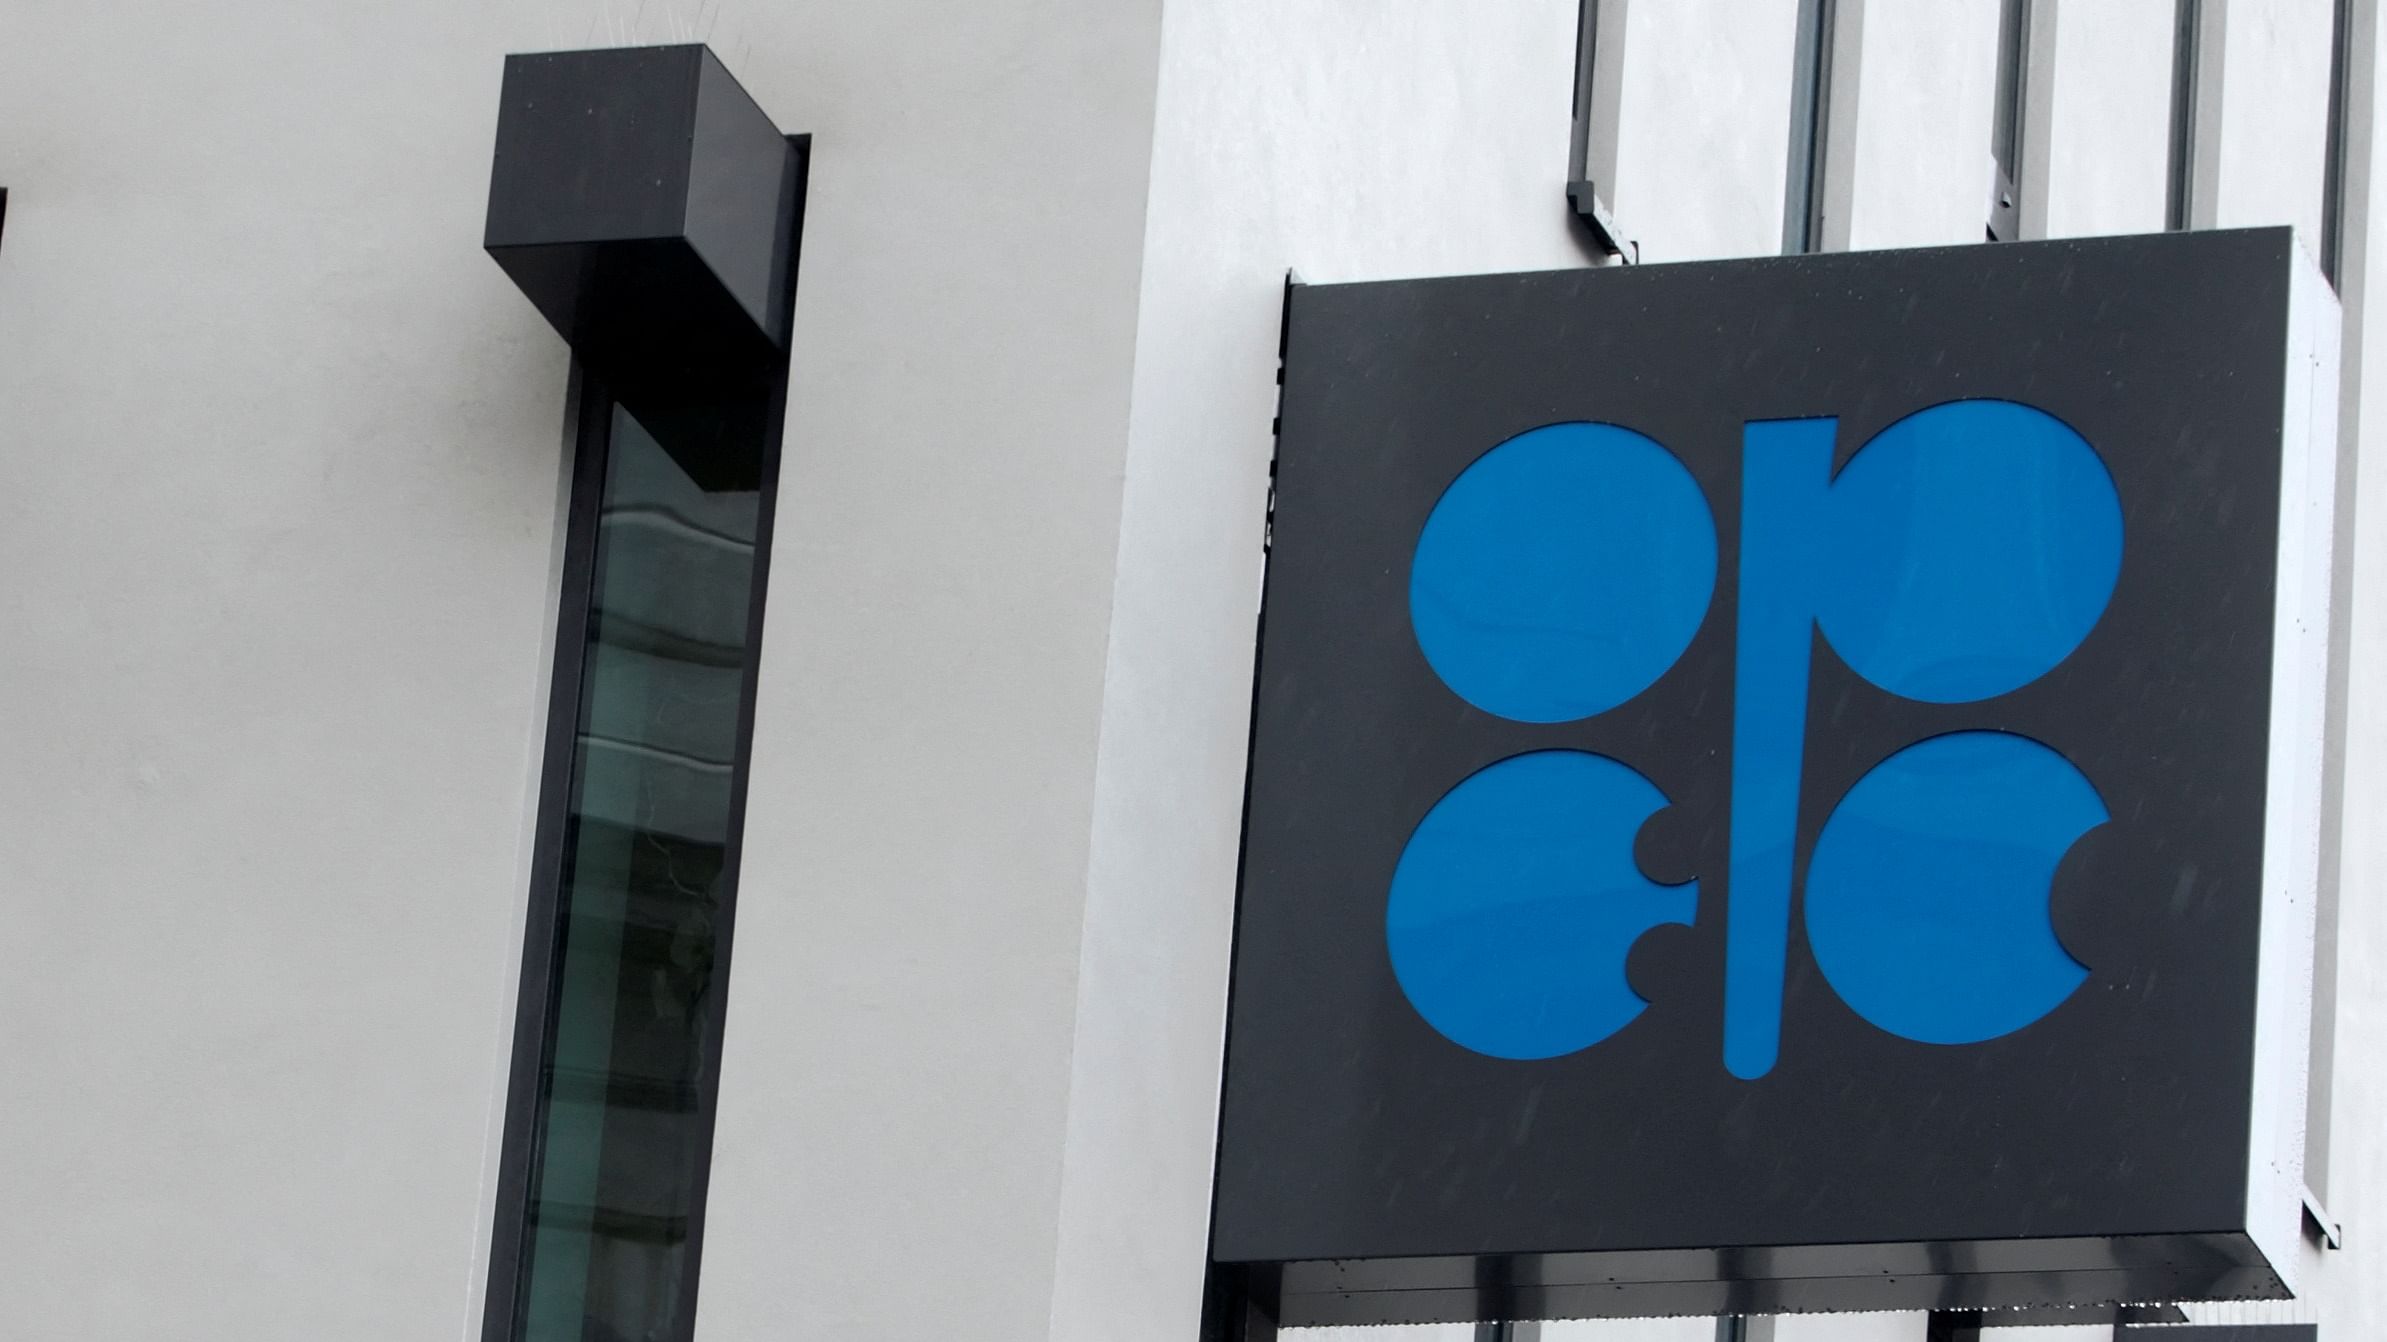 The OPEC logo is pictured on the outside of the new OPEC headquarters in Vienna. Credit: Reuters Photo